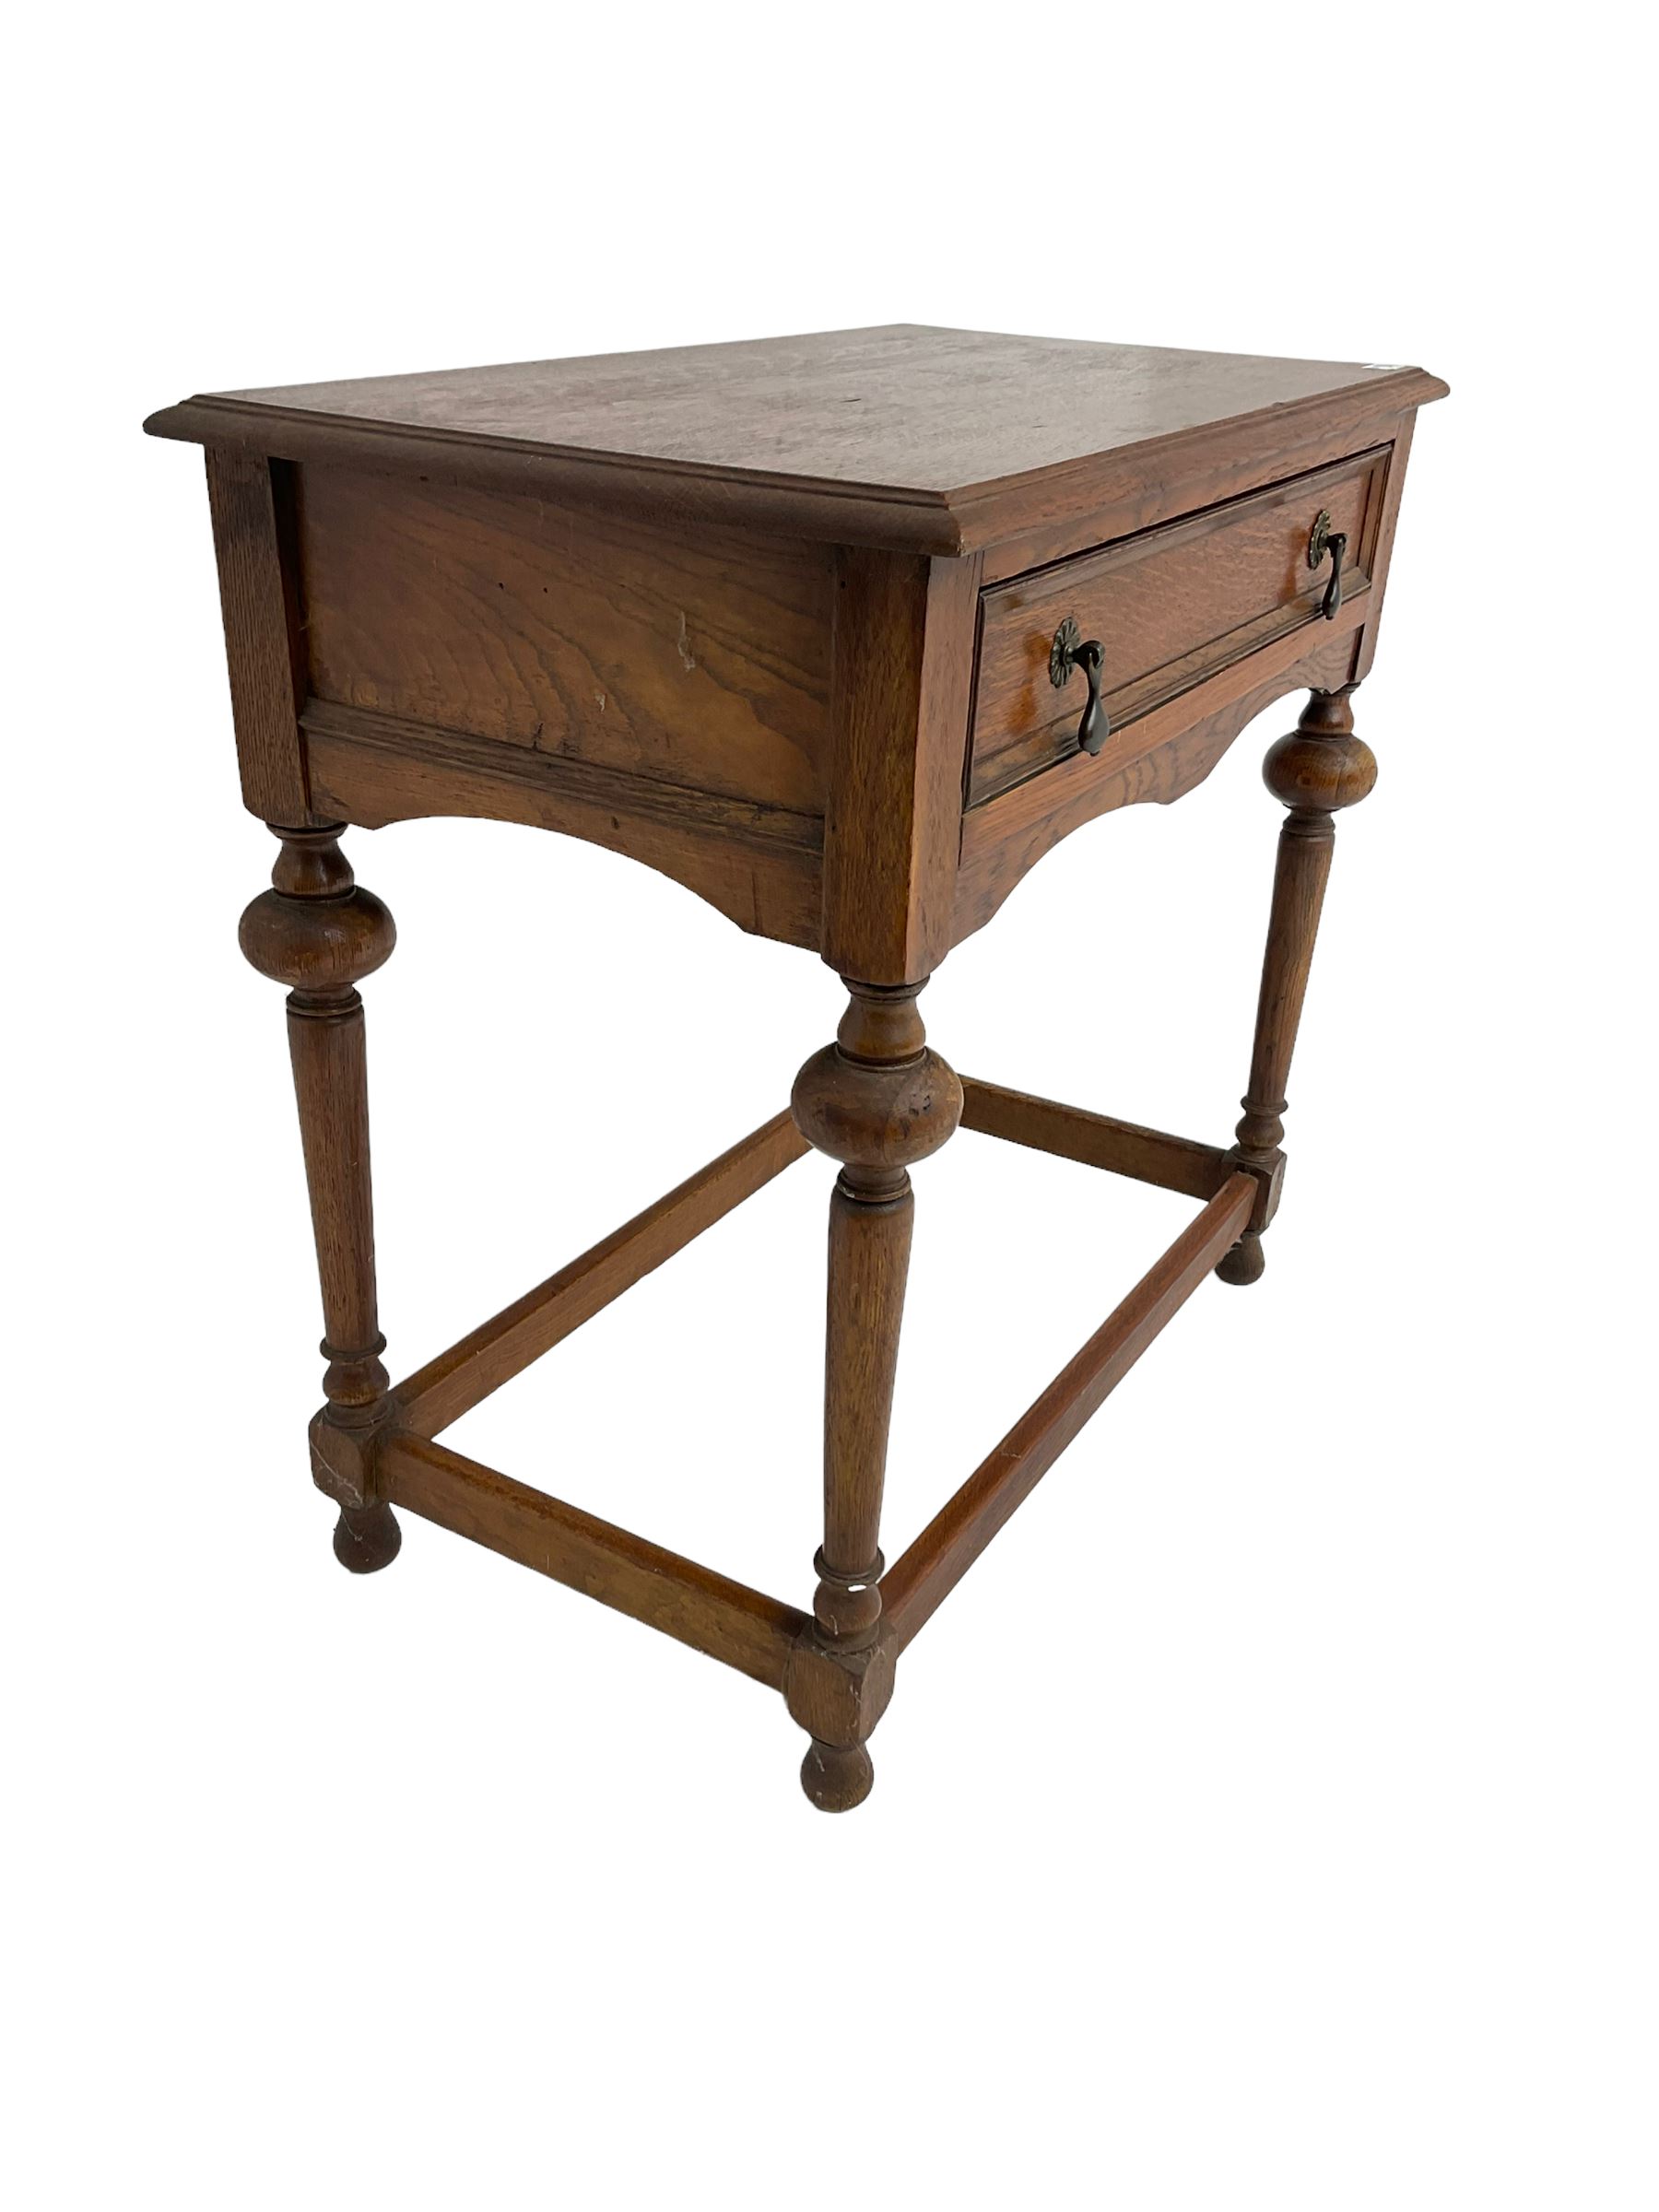 Late 20th century oak side table - Image 6 of 6